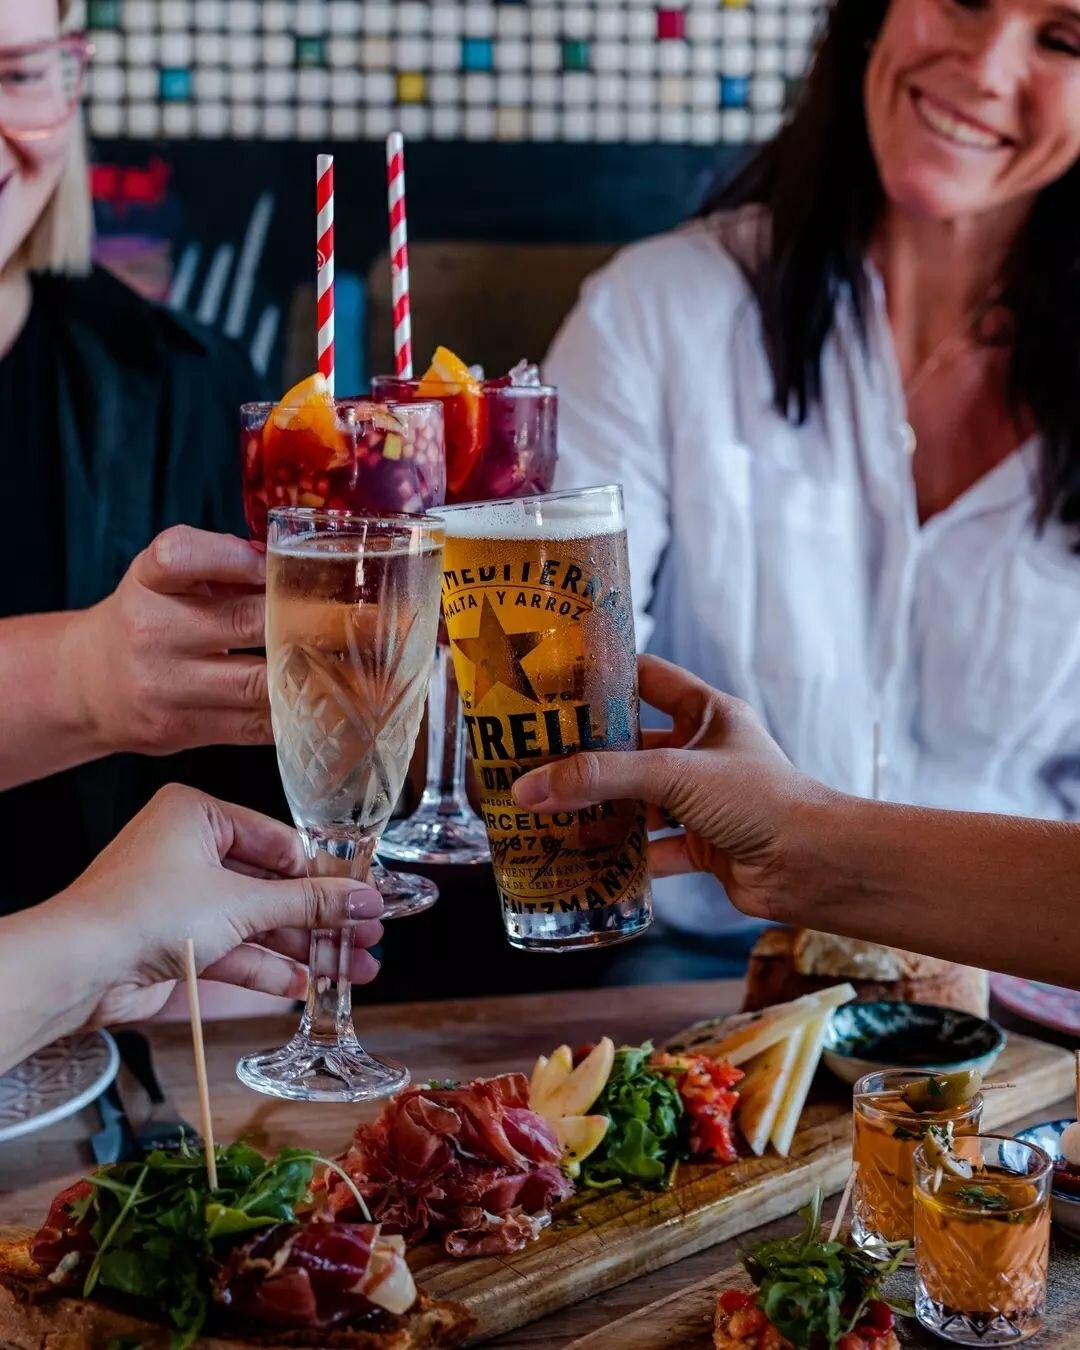 Join us every Saturday &amp; Sunday to indulge in a feast of Pinchos finest tapas and 90 minutes of bottomless red or white sangria, cava &amp; cervezas. That&rsquo;s Spanish for bubbles and beer! Or upgrade your brunch to our Prima option to include